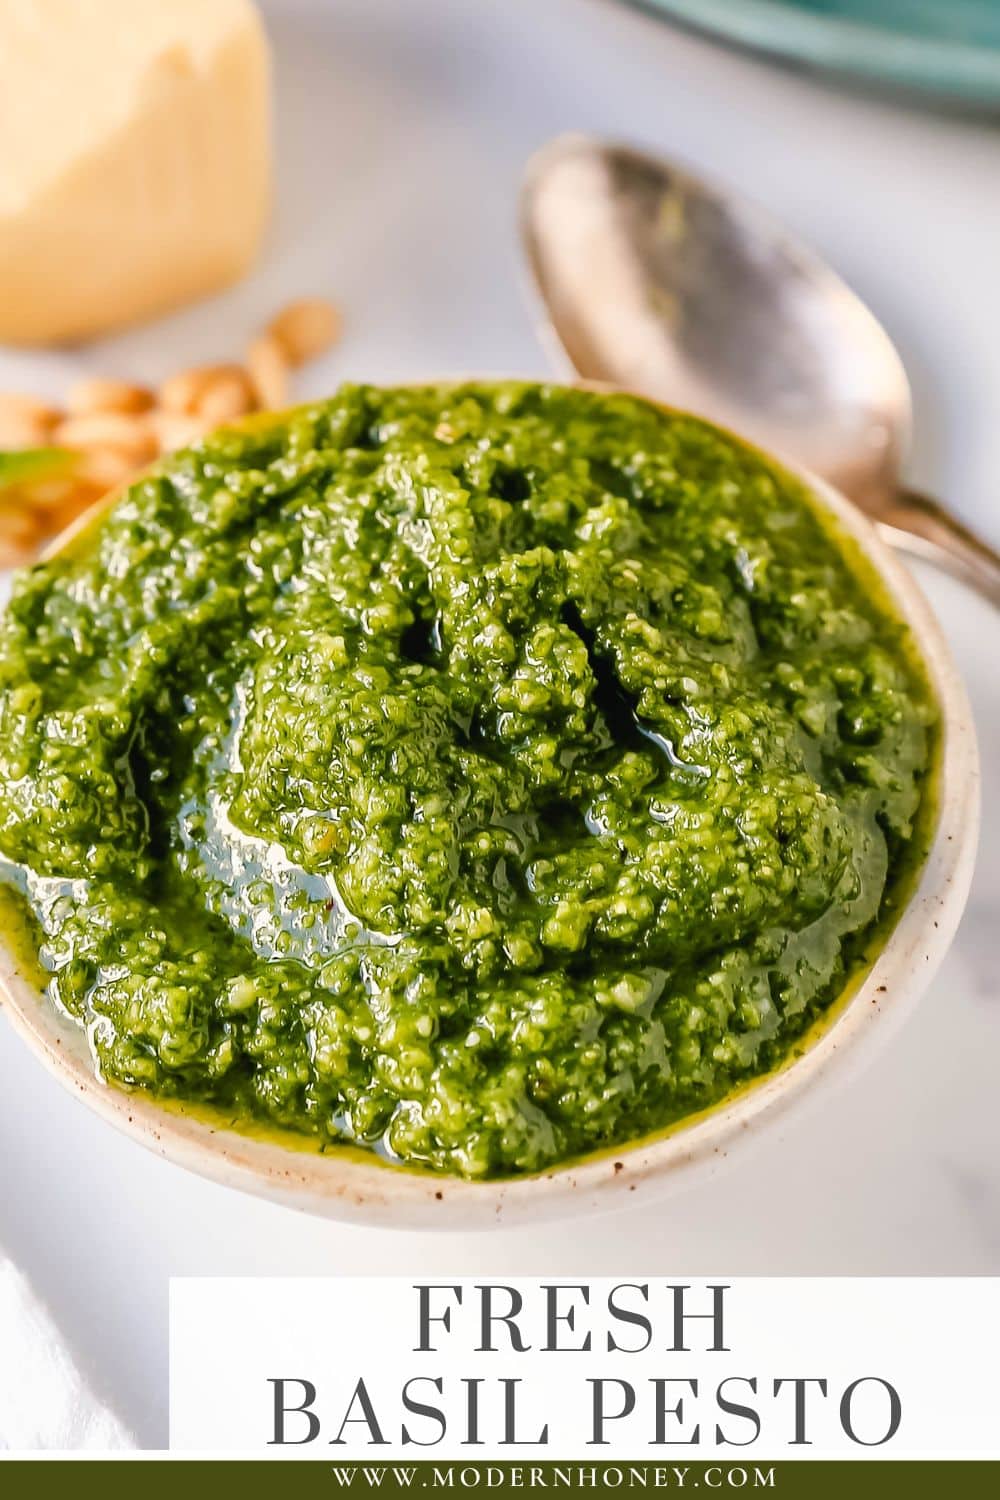 Homemade Basil Pesto Sauce made with fresh basil, extra-virgin olive oil, pine nuts, garlic, parmesan cheese, and salt and pepper. This pesto sauce is the best recipe and can be used on pasta, pizza, sandwiches, or to be used as a dip with rustic French bread.Homemade Basil Pesto Sauce made with fresh basil, extra-virgin olive oil, pine nuts, garlic, parmesan cheese, and salt and pepper. This pesto sauce is the best recipe and can be used on pasta, pizza, sandwiches, or to be used as a dip with rustic French bread.